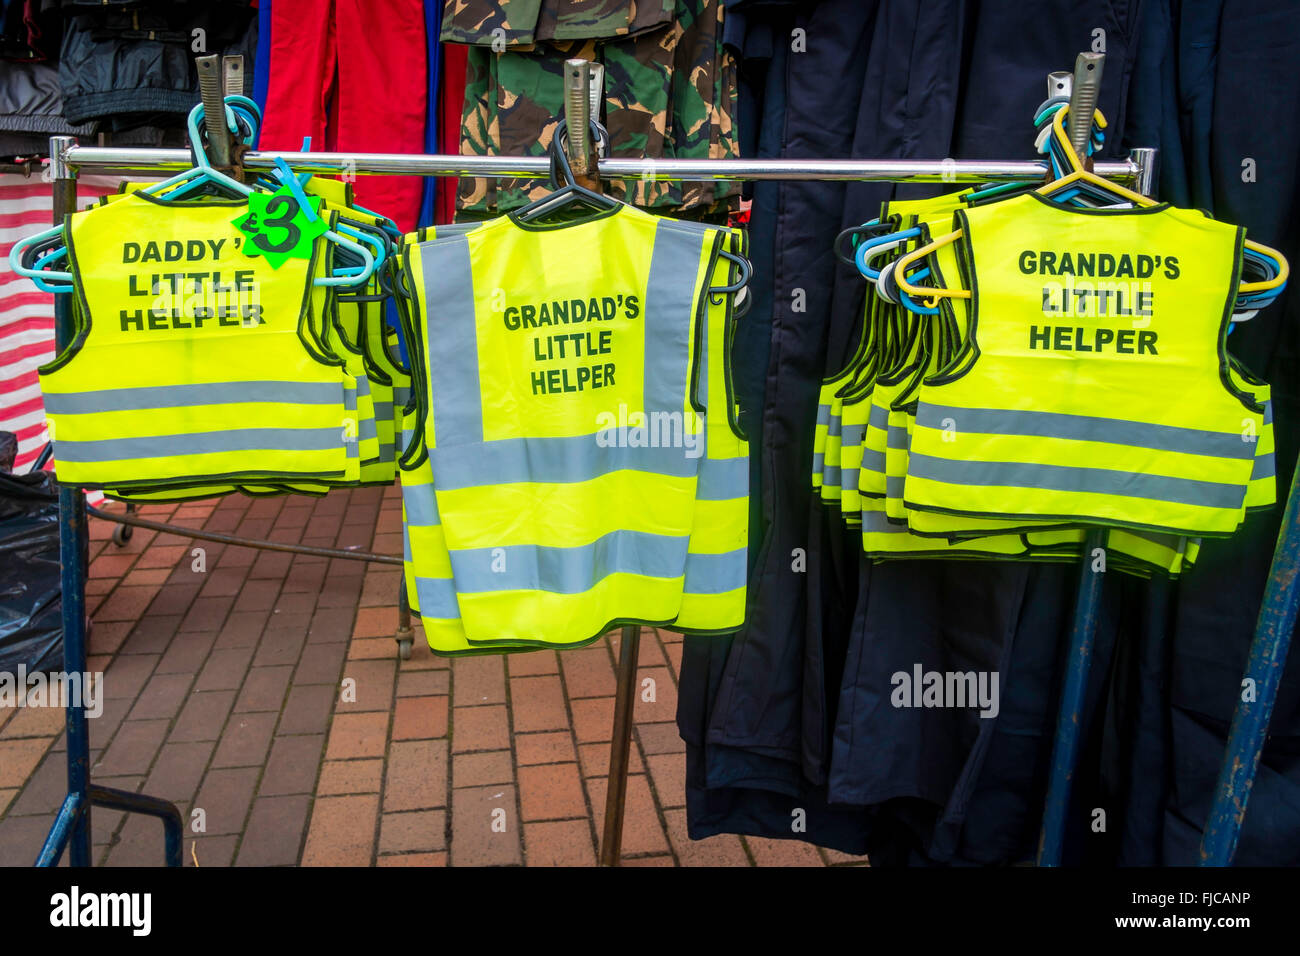 Road Safety Childs High Visibility Tabards for sale on a market stall with text Daddies little helper or Grandad's little helper Stock Photo